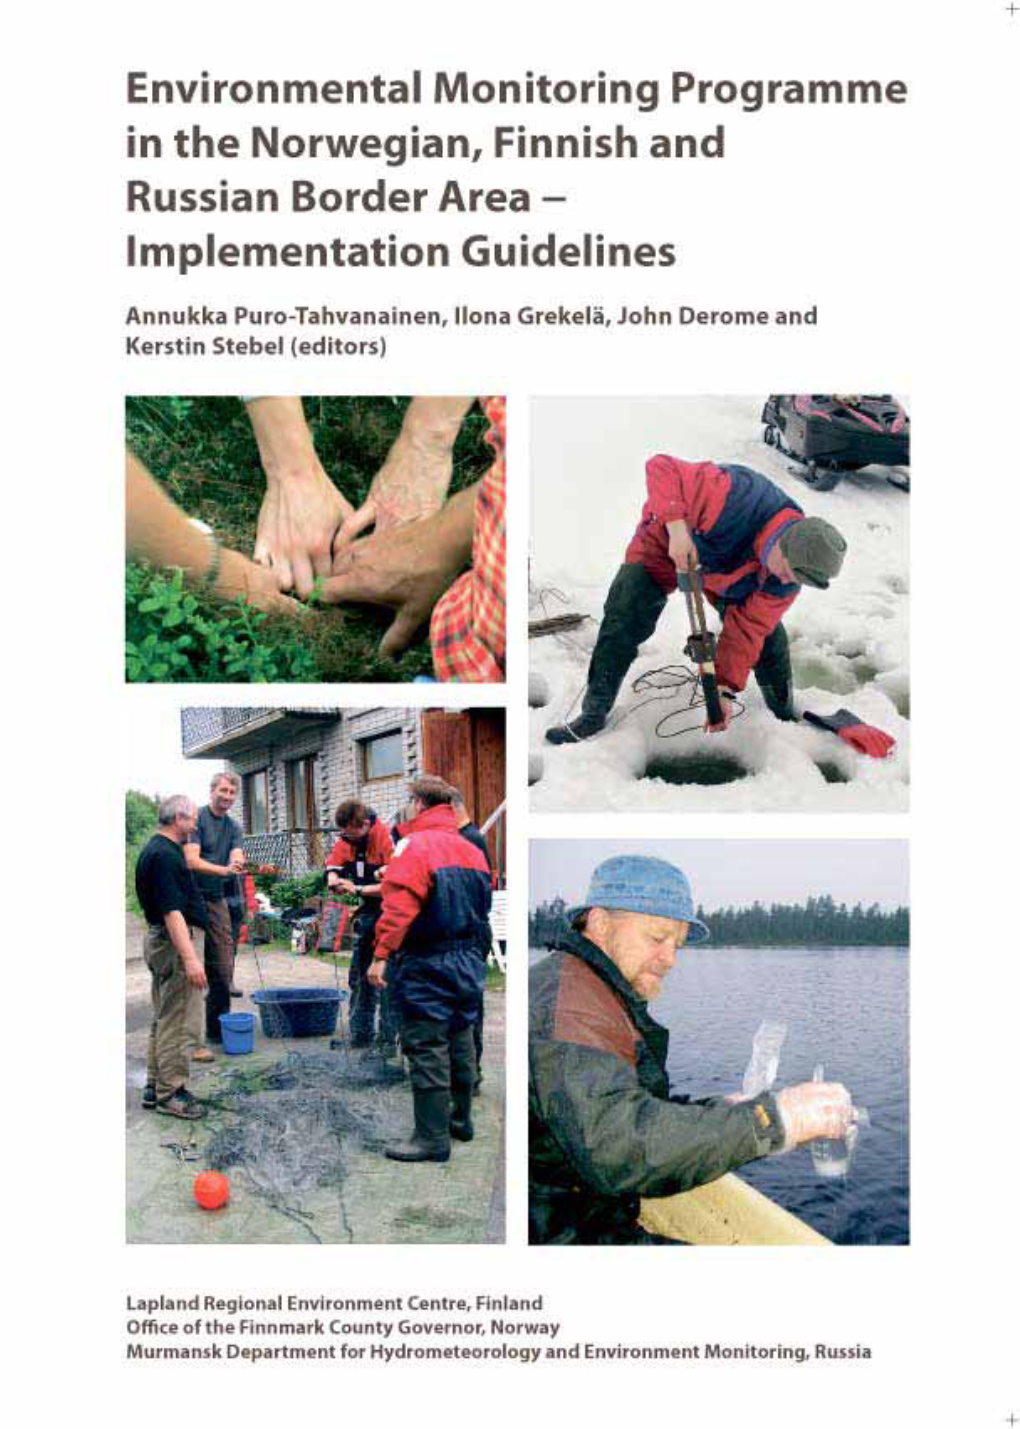 Implementation Guidelines